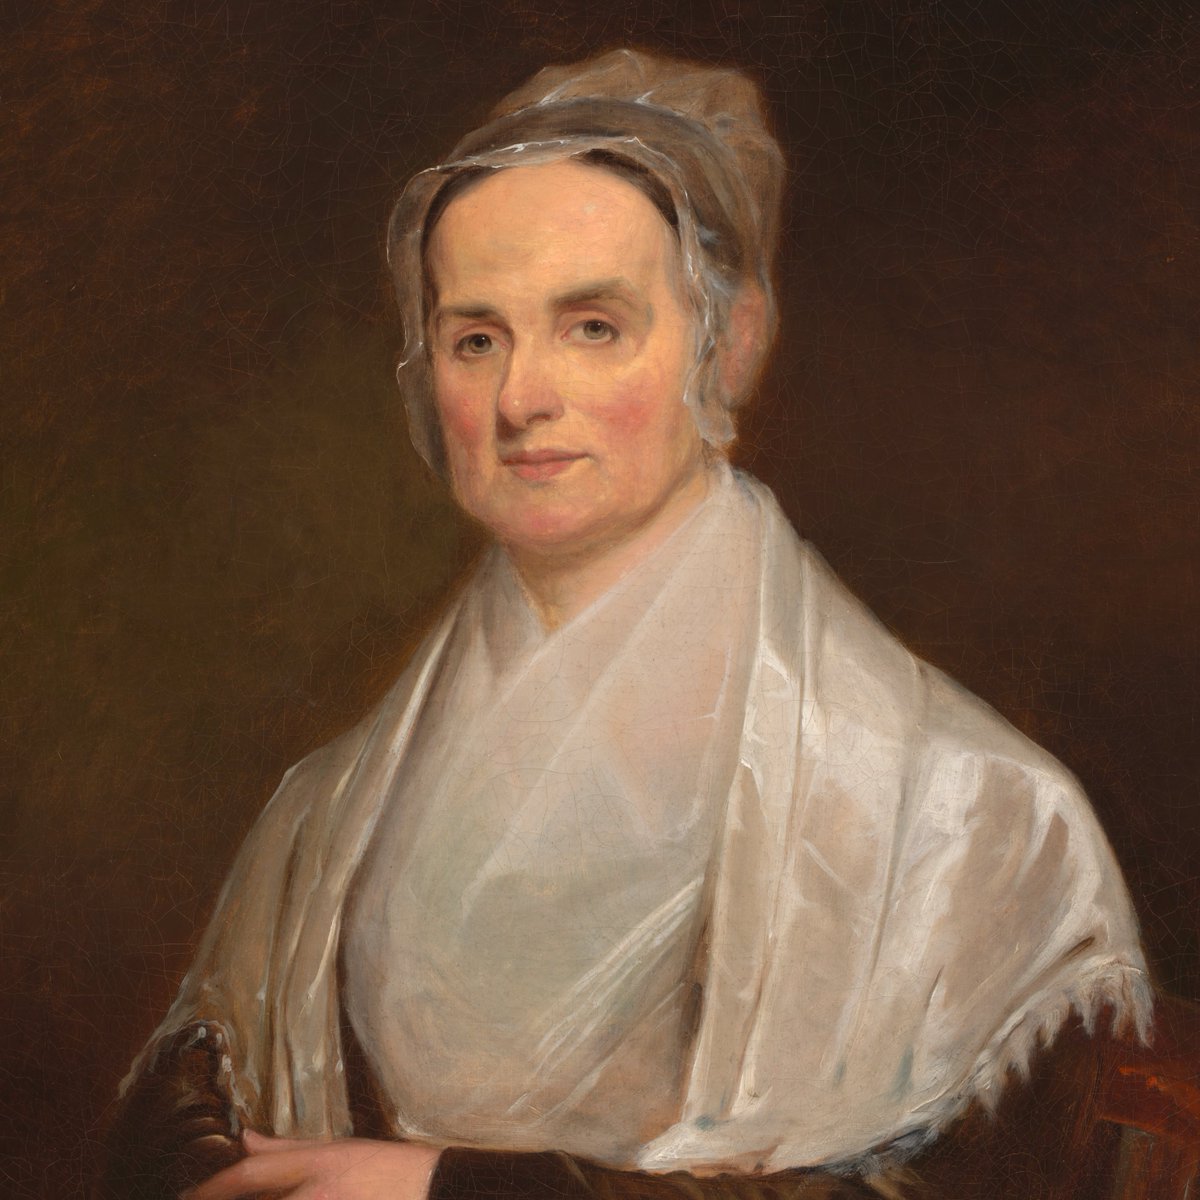 Charles Remond was part of another delegation that included William Lloyd Garrison and Lucretia Mott. About Mott, perhaps the greatest woman of her era, Garrison asked: “In what assembly is that almost peerless woman NOT qualified to take an equal part?”